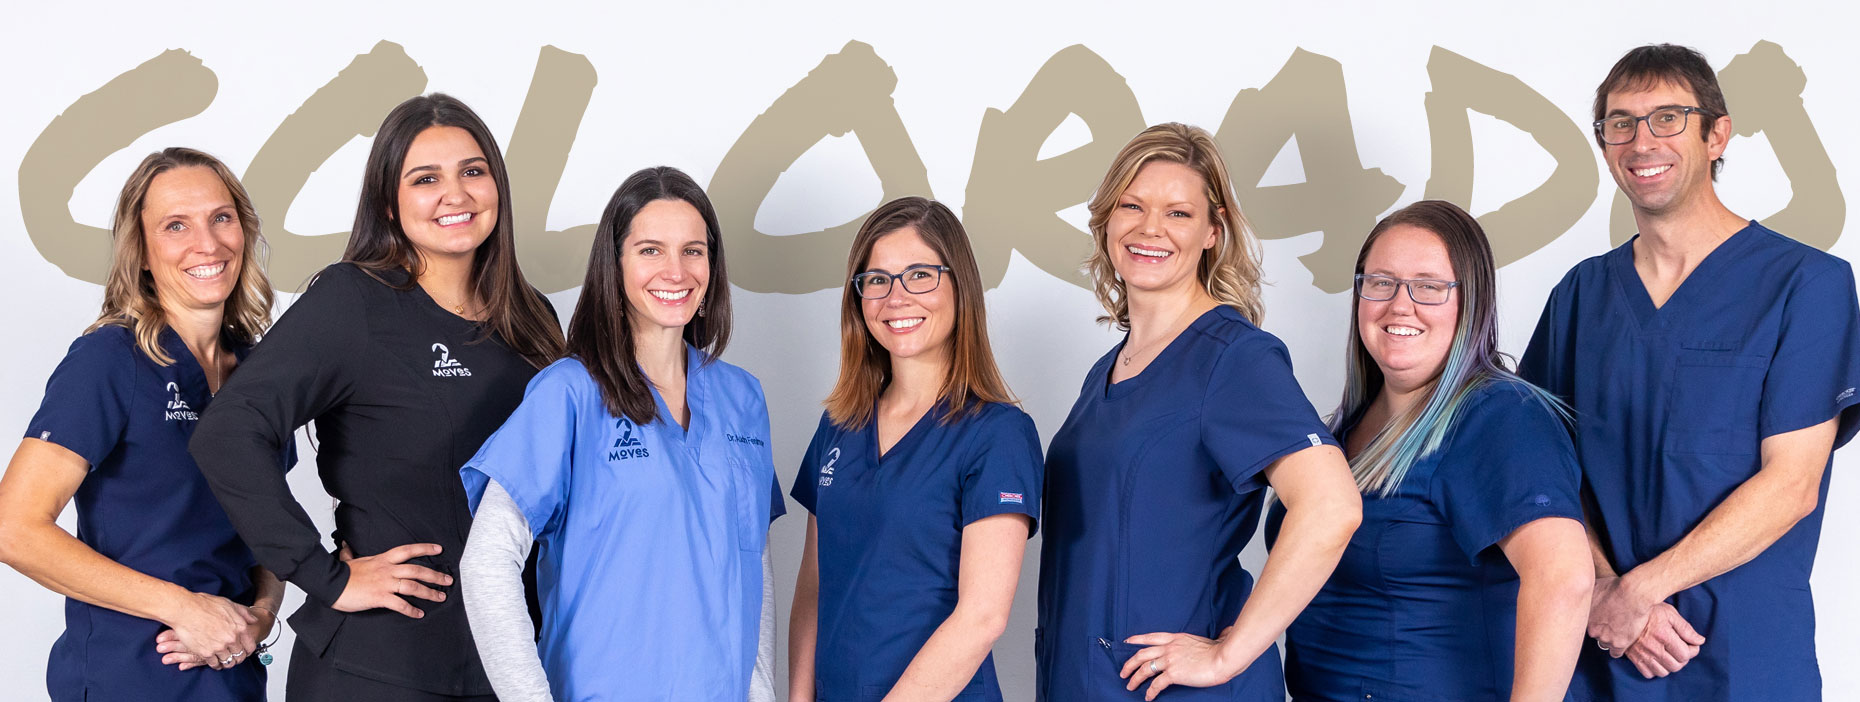 Team photo of MOVES mobile veterinary specialists in Colorado